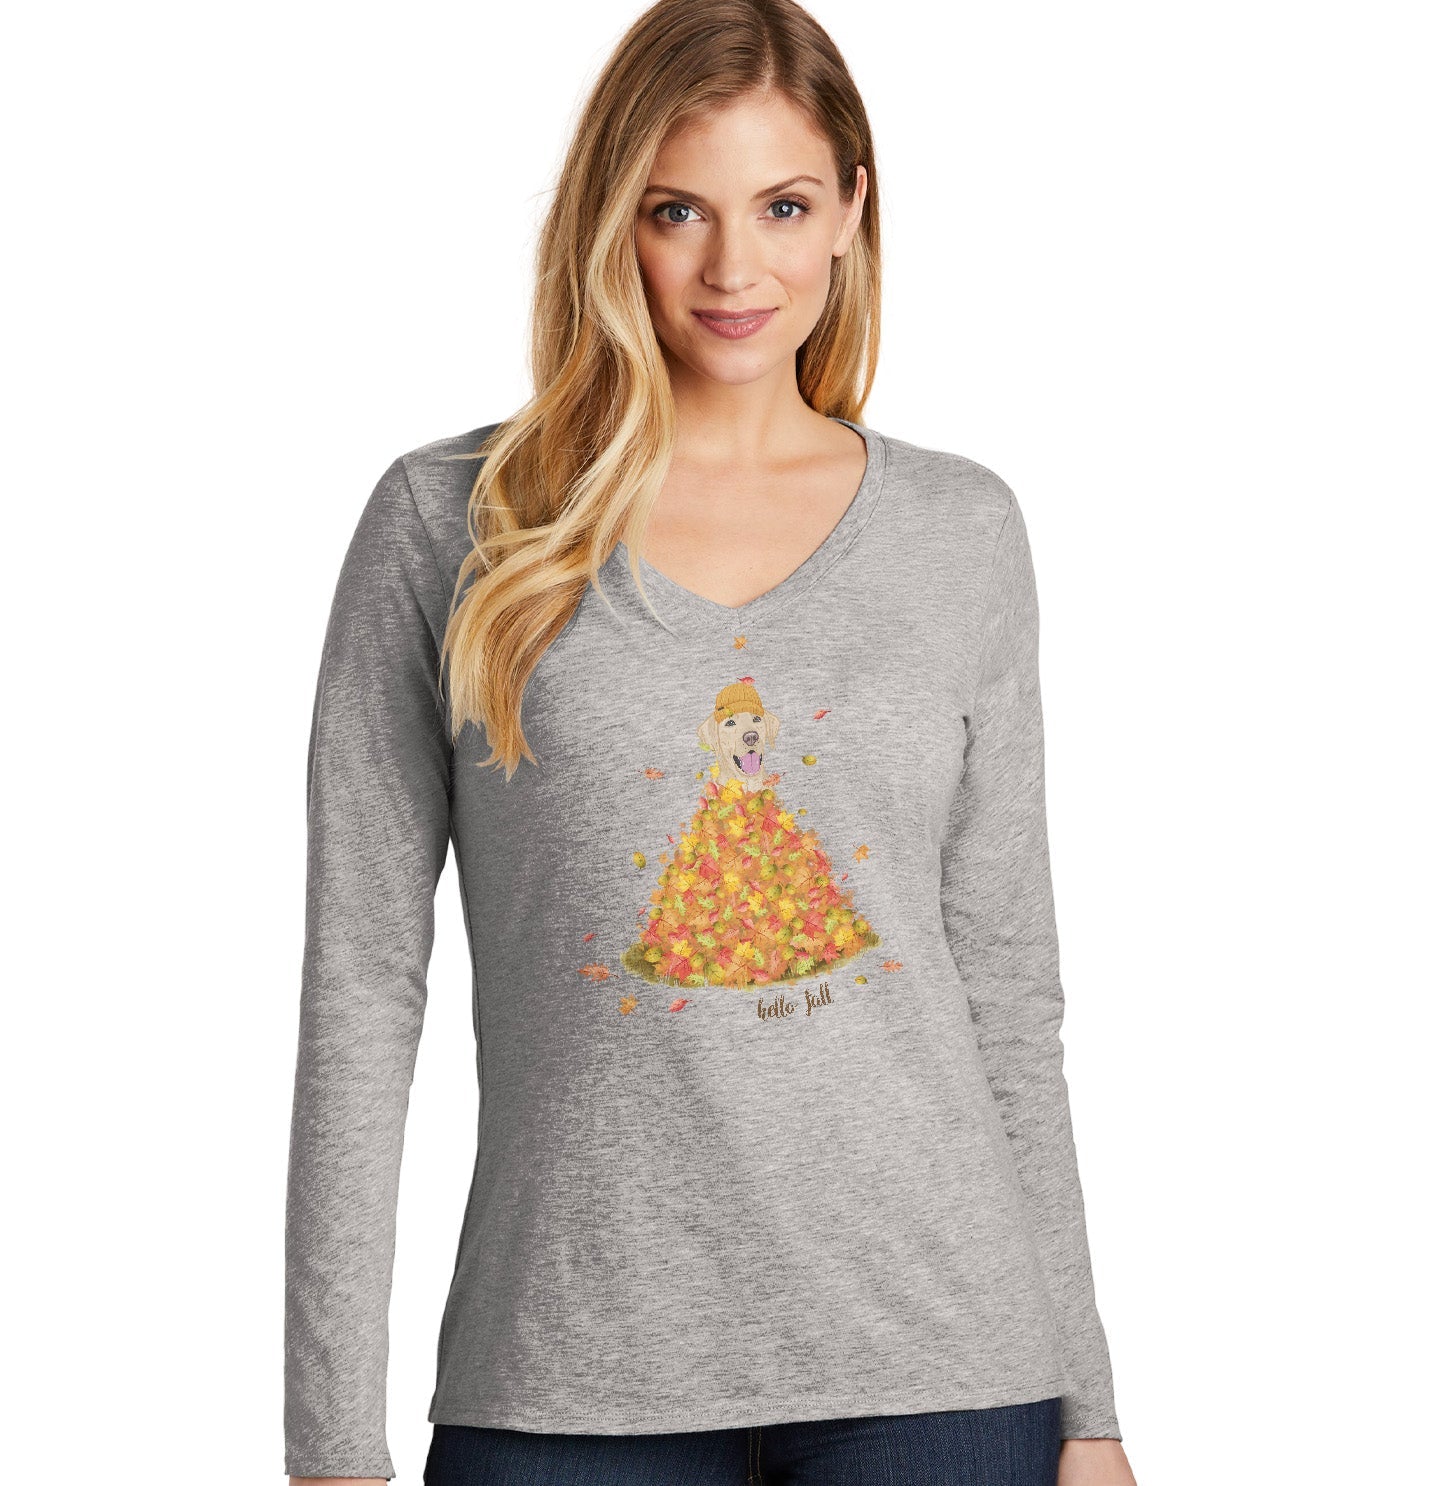 Leaf Pile and Yellow Lab - Women's V-Neck Long Sleeve T-Shirt